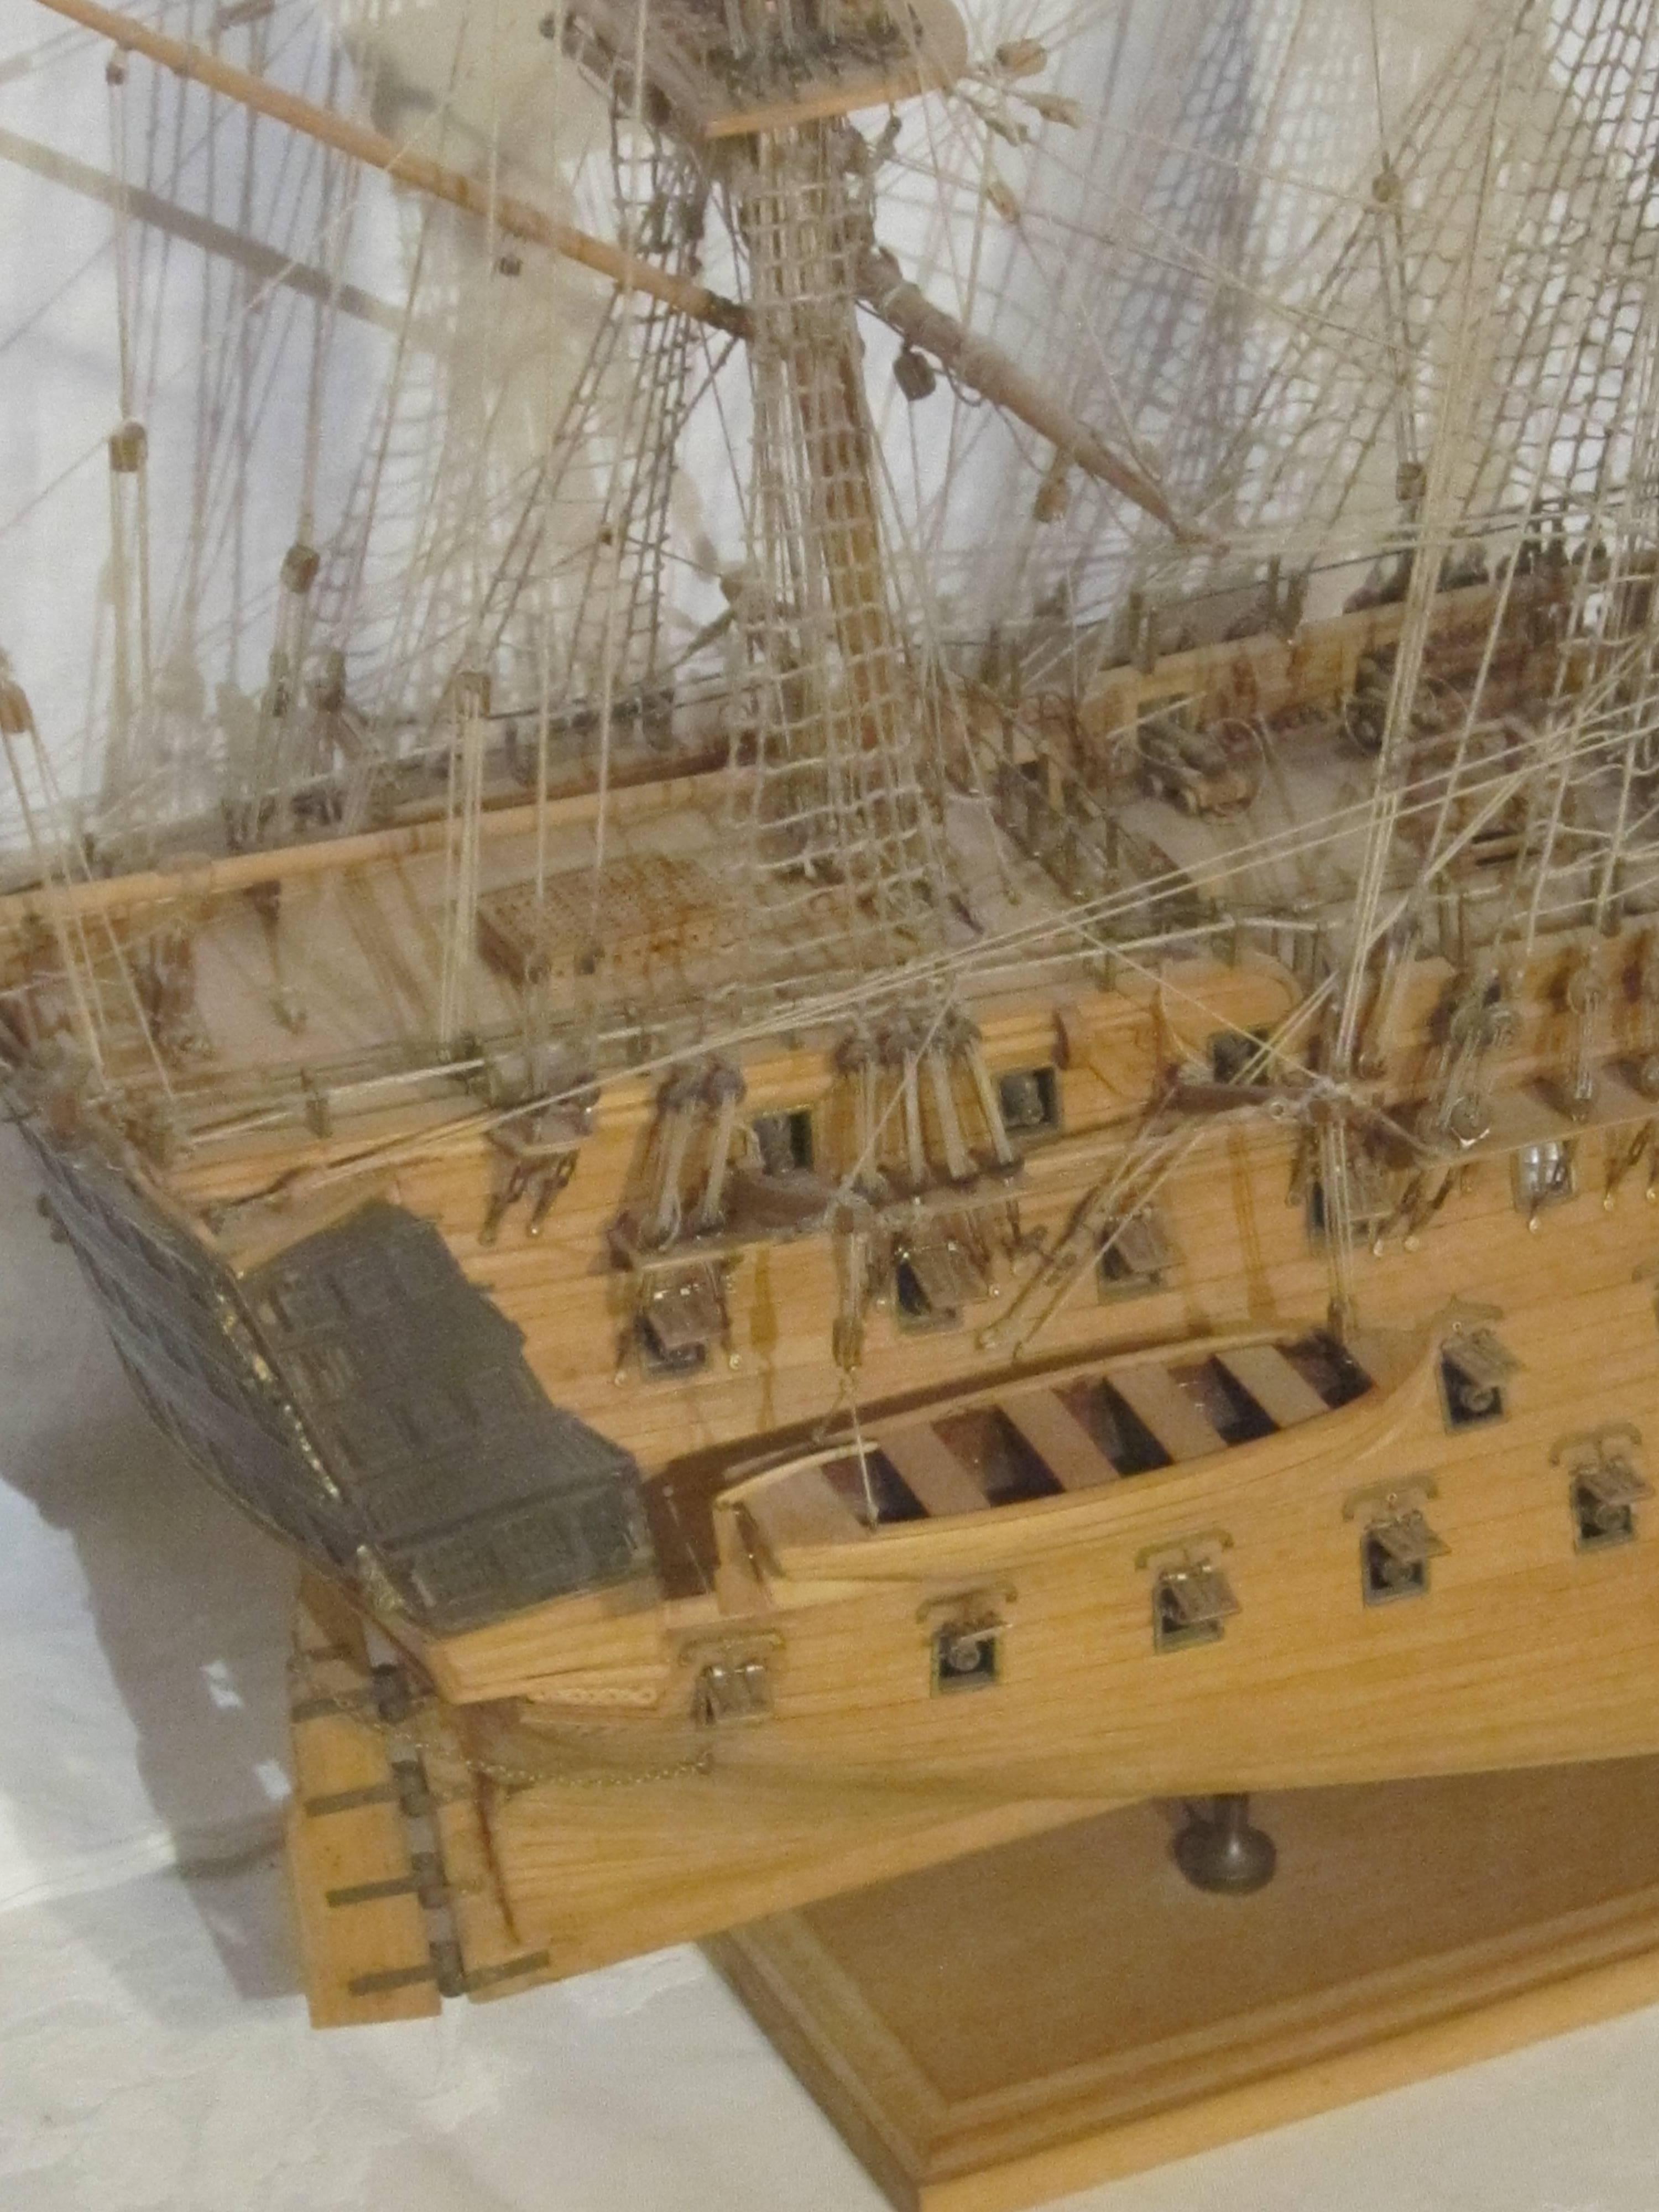 This piece was assembled by Abilene, Texas native Frank A. Bolen. Mr. Bolen spent two and a half years working on the project. The rigging was hand tied with tweezers, and the ribs on the hull were cut meticulously with a razor tool and laid side by